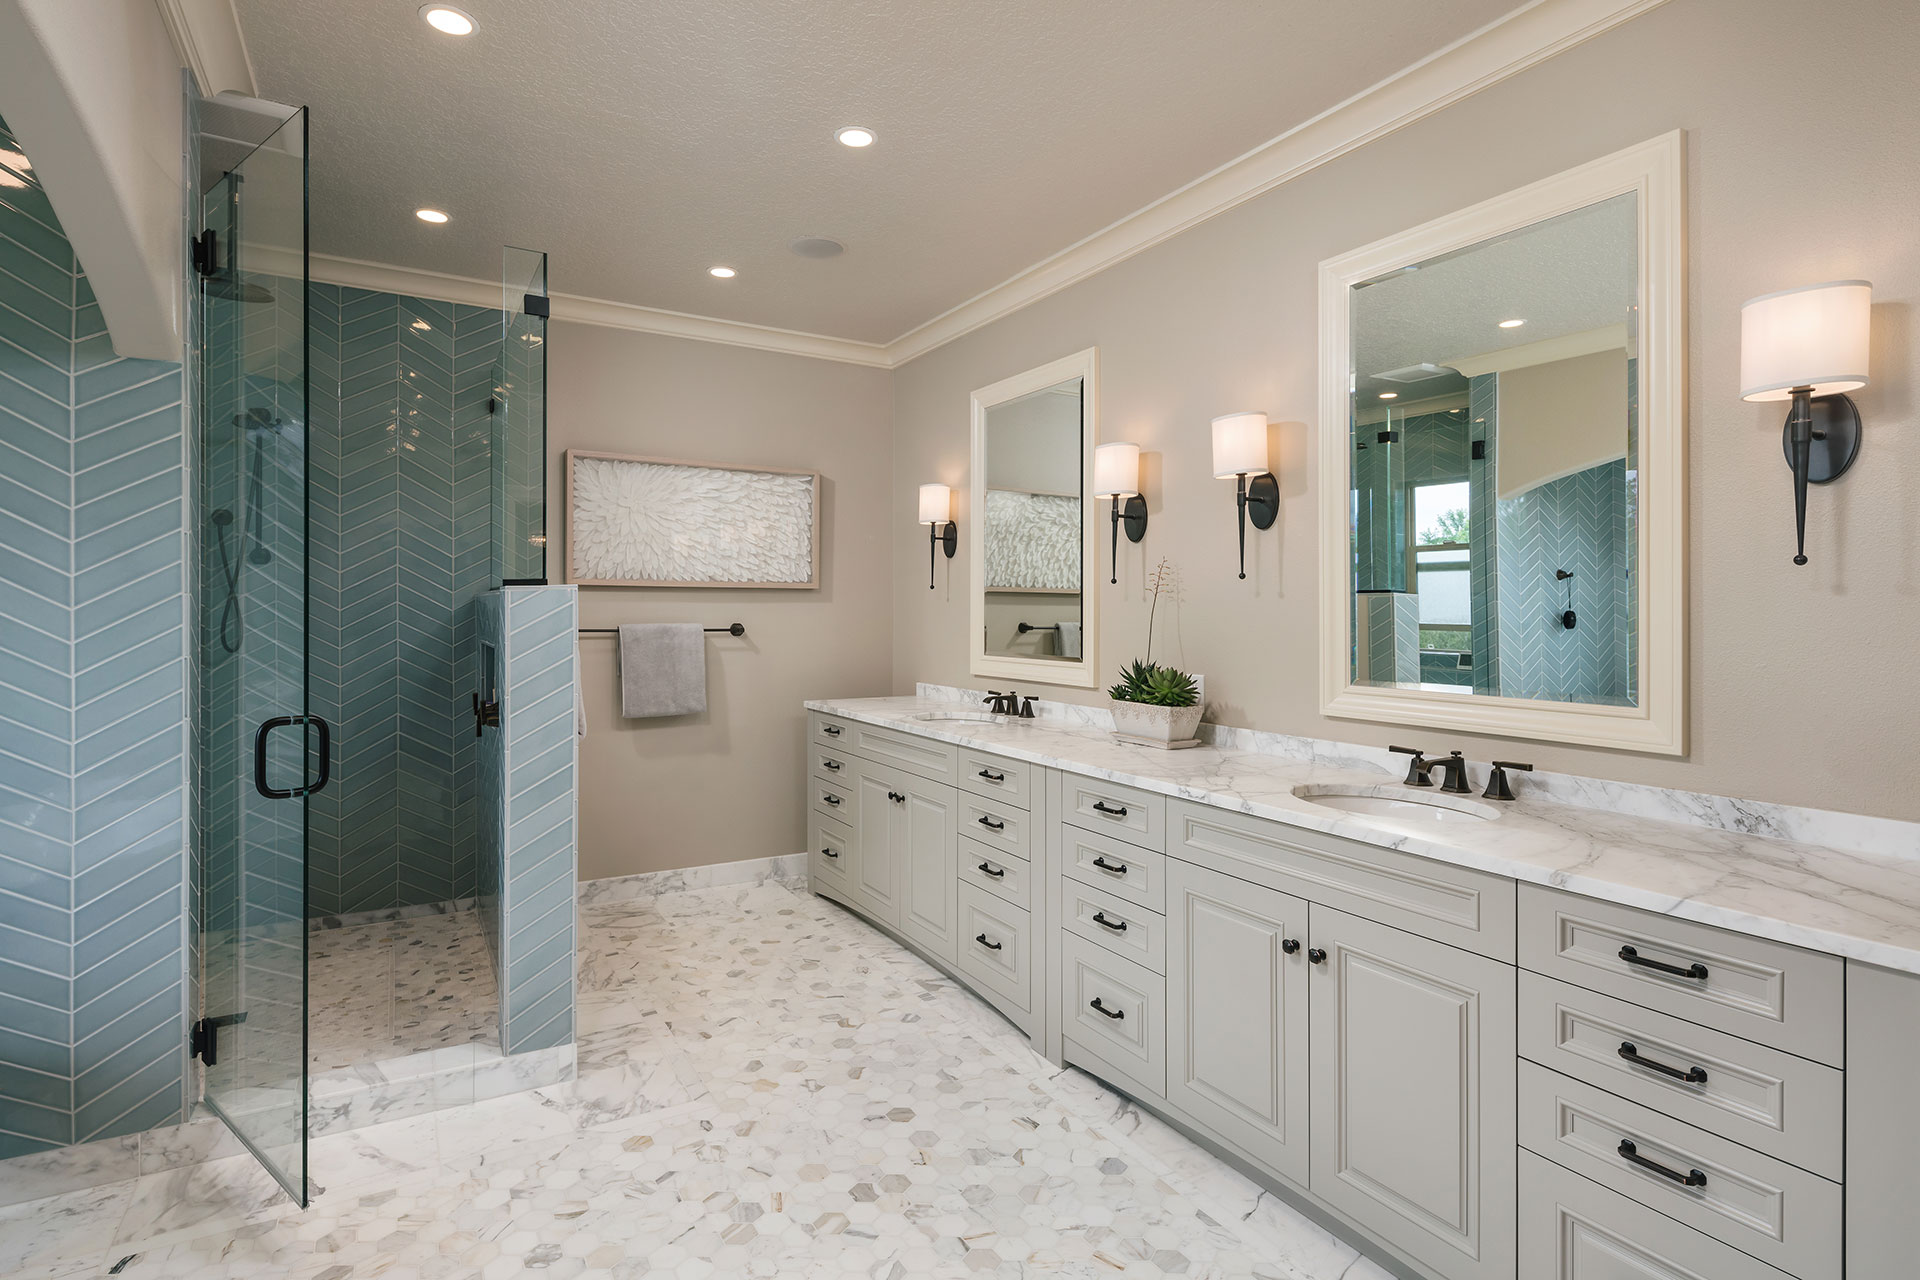 The primary bathroom at features a new double vanity and large shower as part of the whole house interior remodel. The floors and countertop are Calacatta marble.